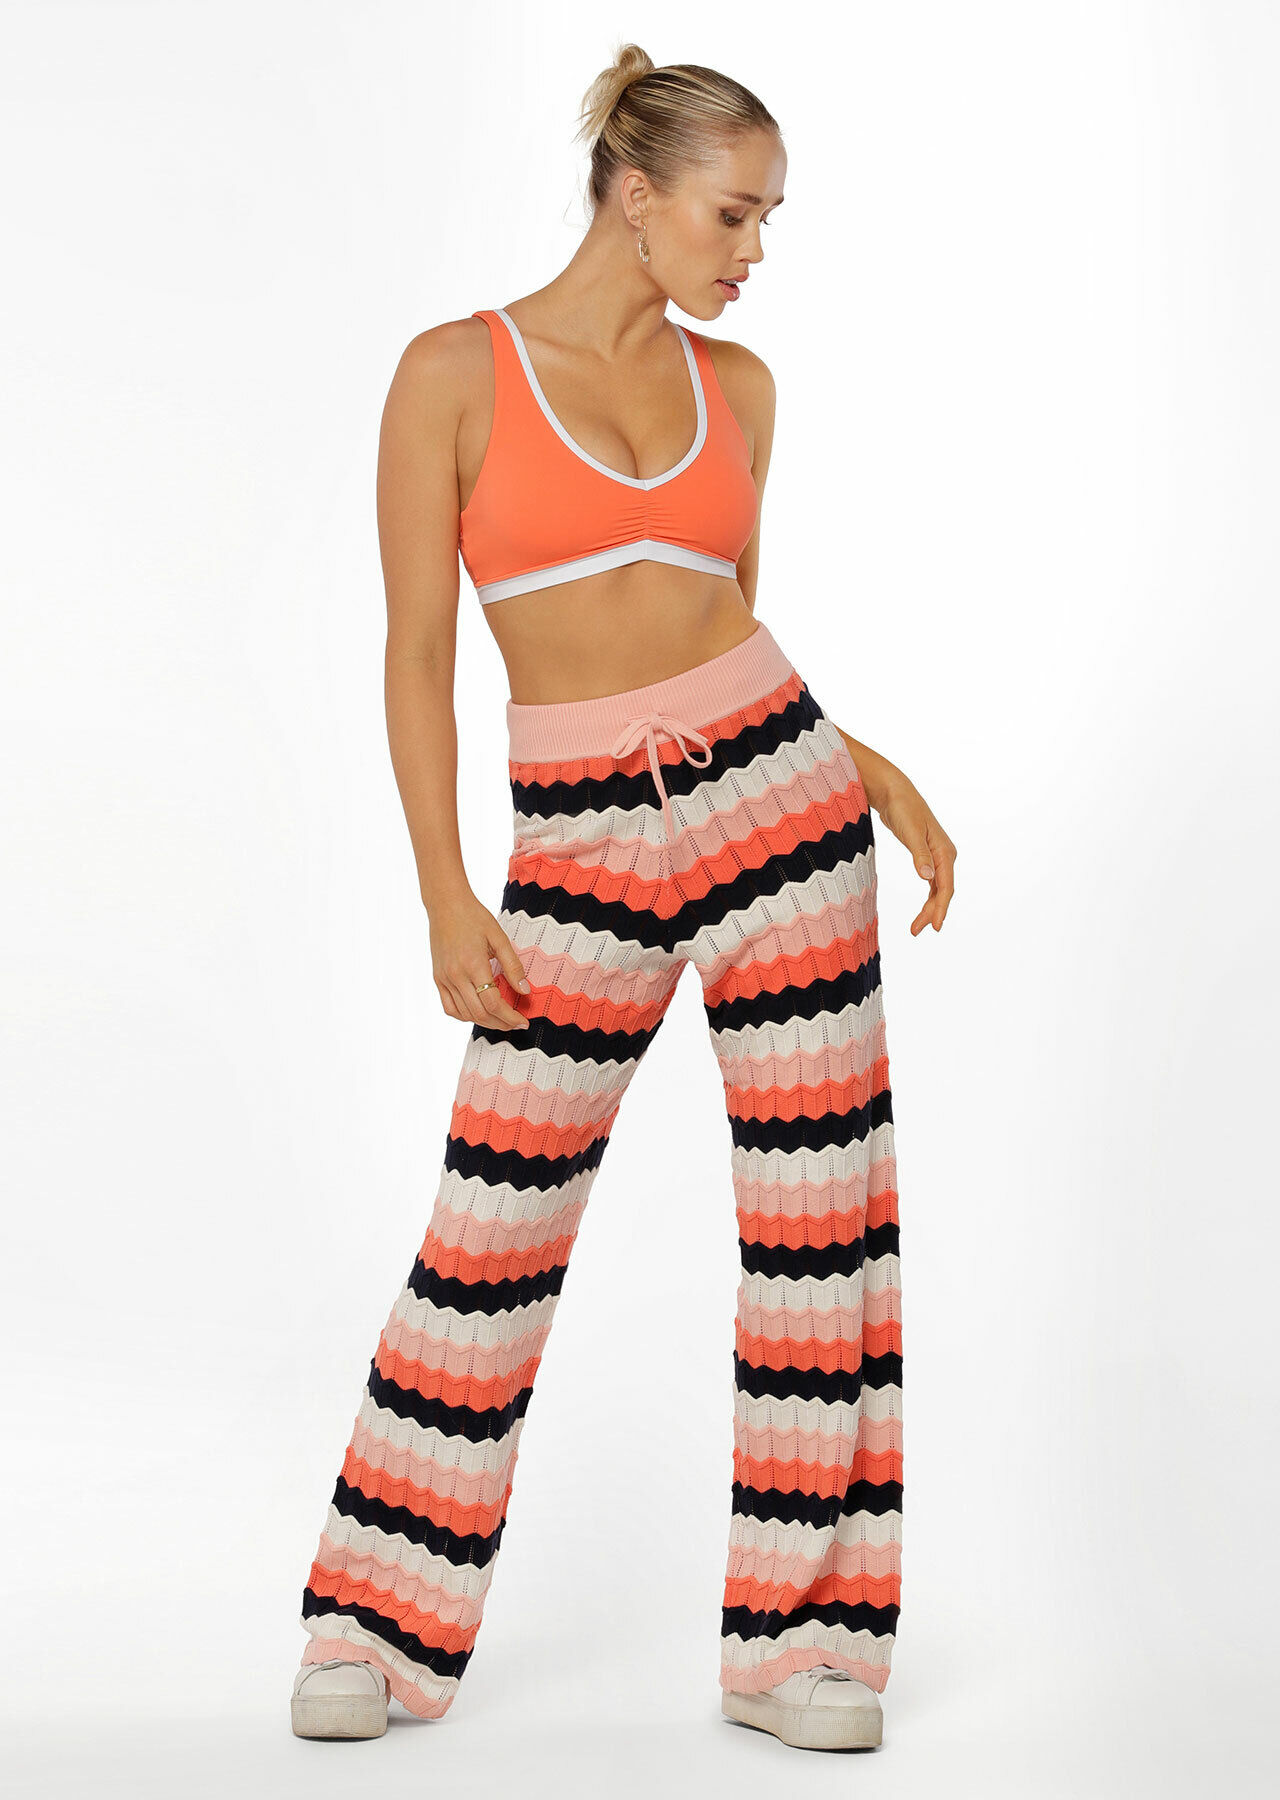 Downtime Lounge Pants | Lounge Pants For Women | Boody